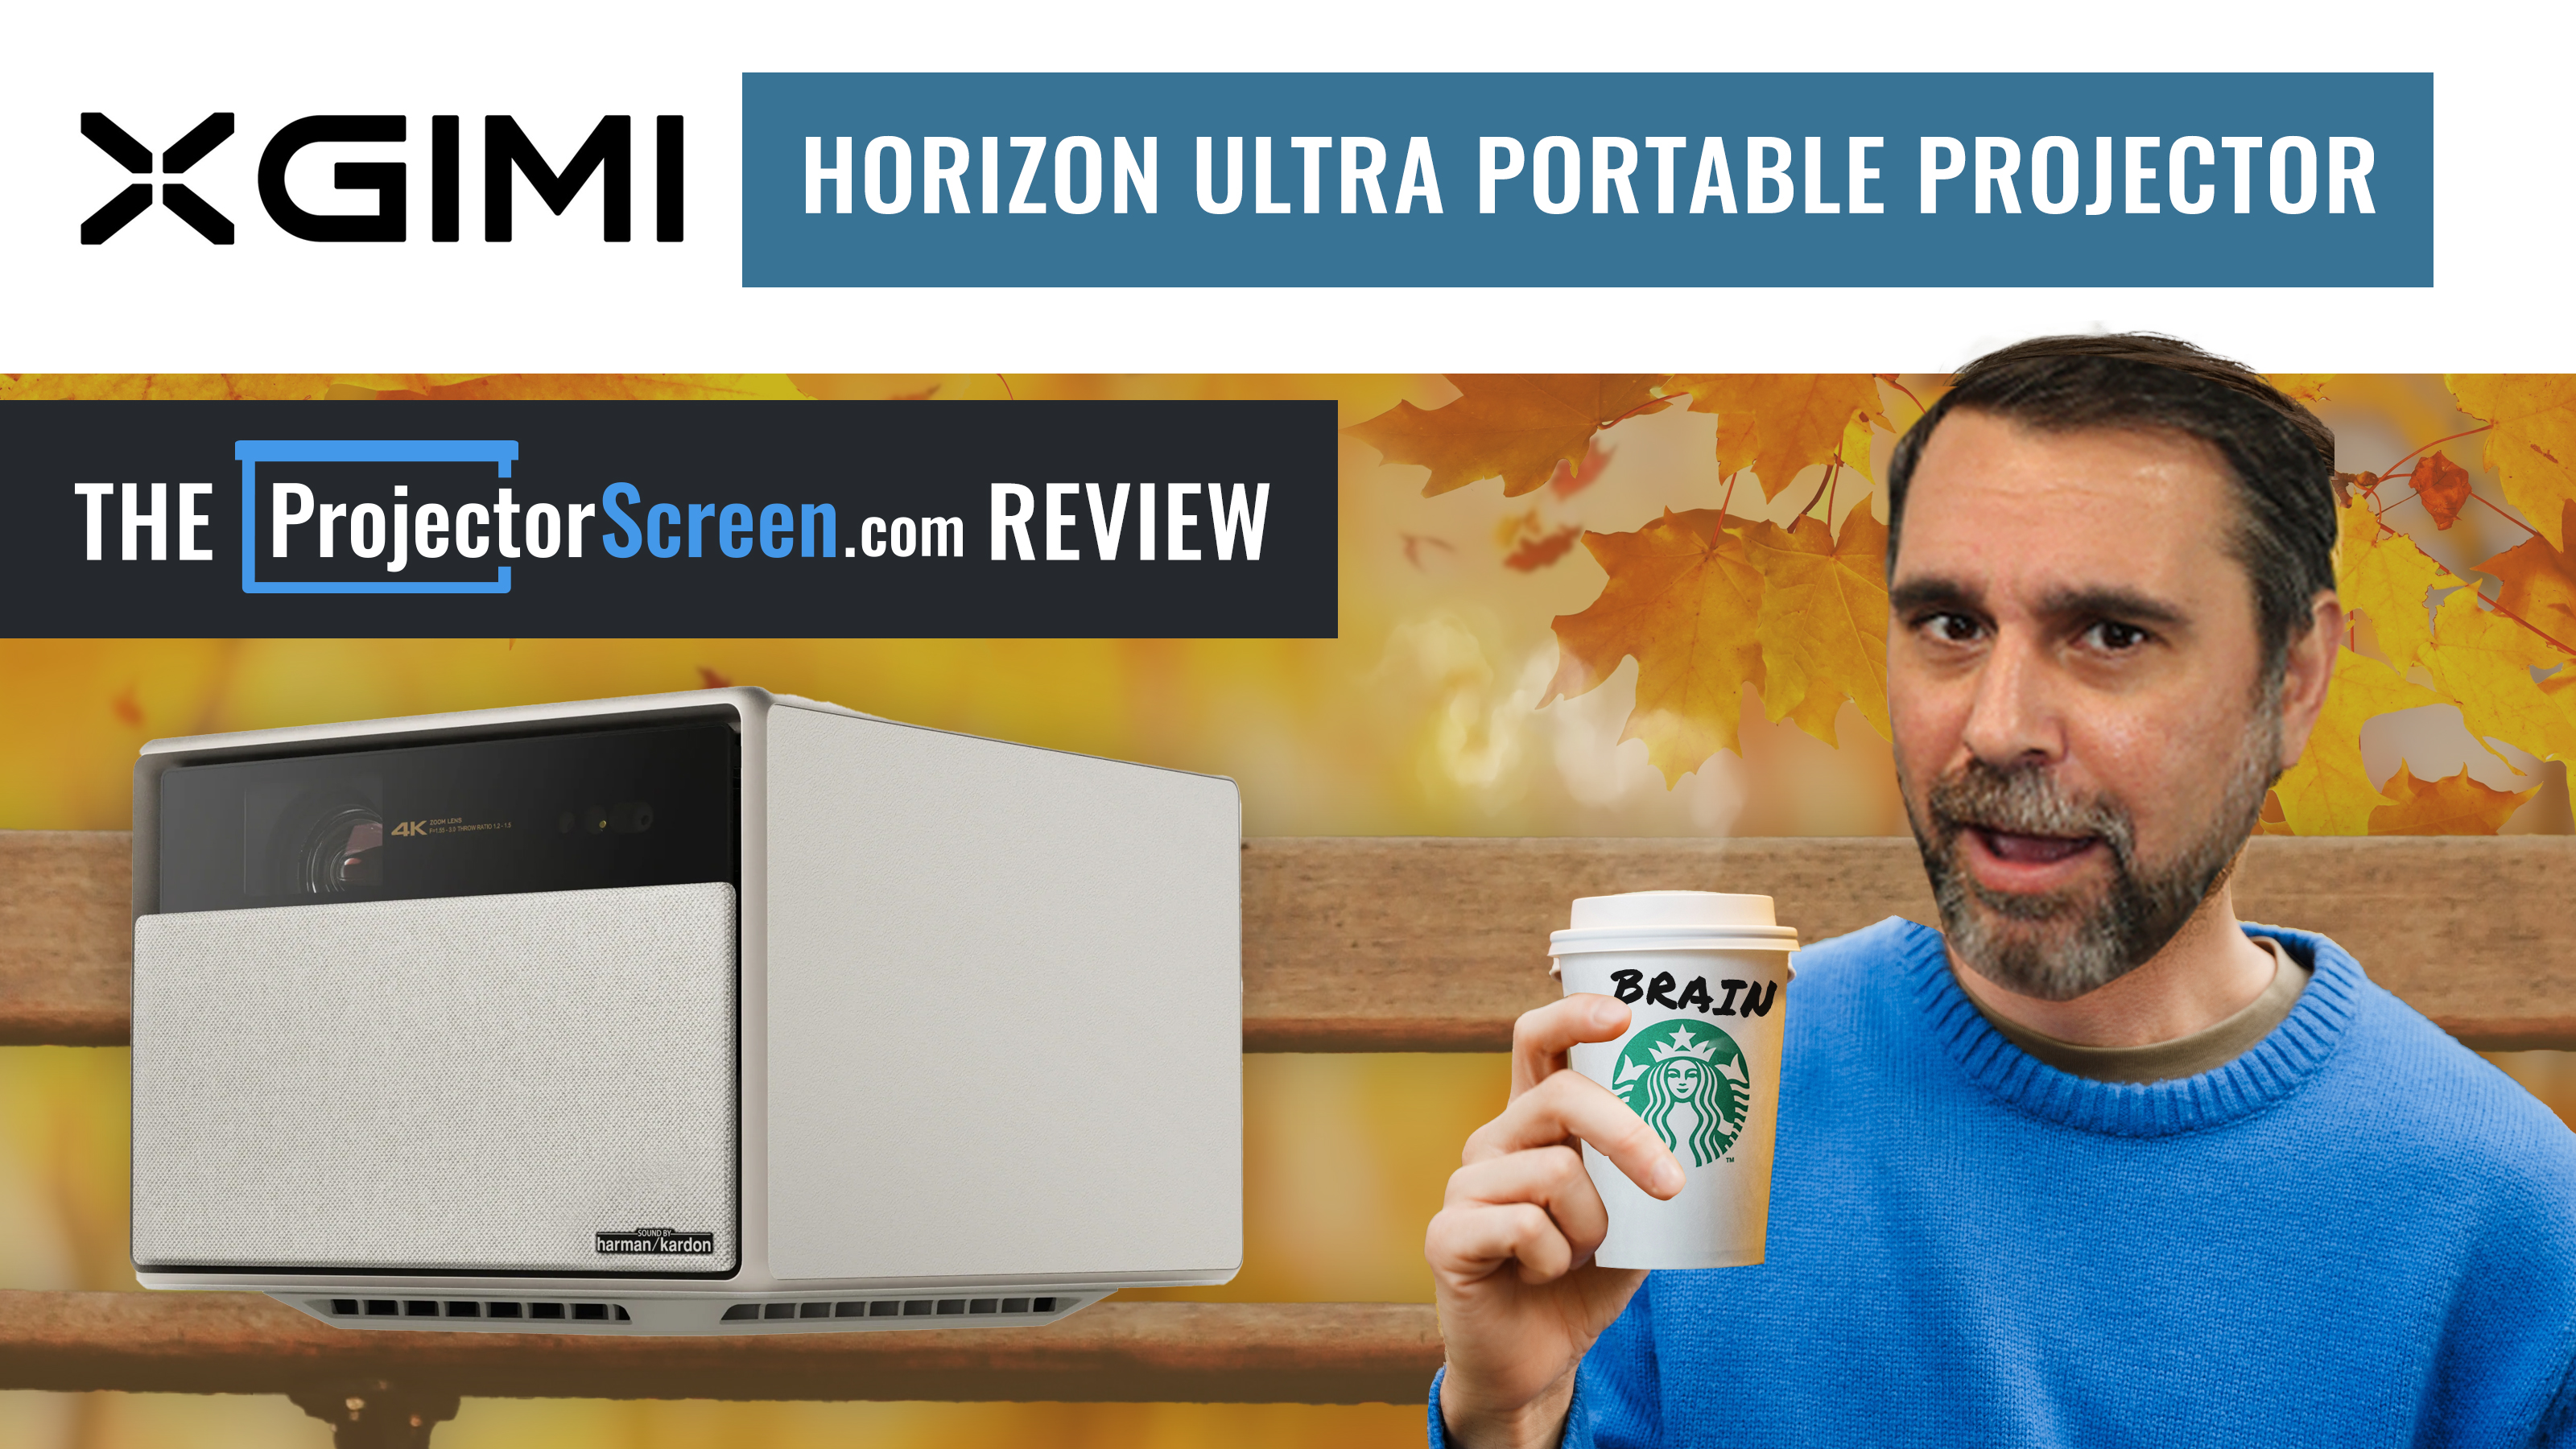 XGIMI Horizon Ultra Review, 4K Projector Rating